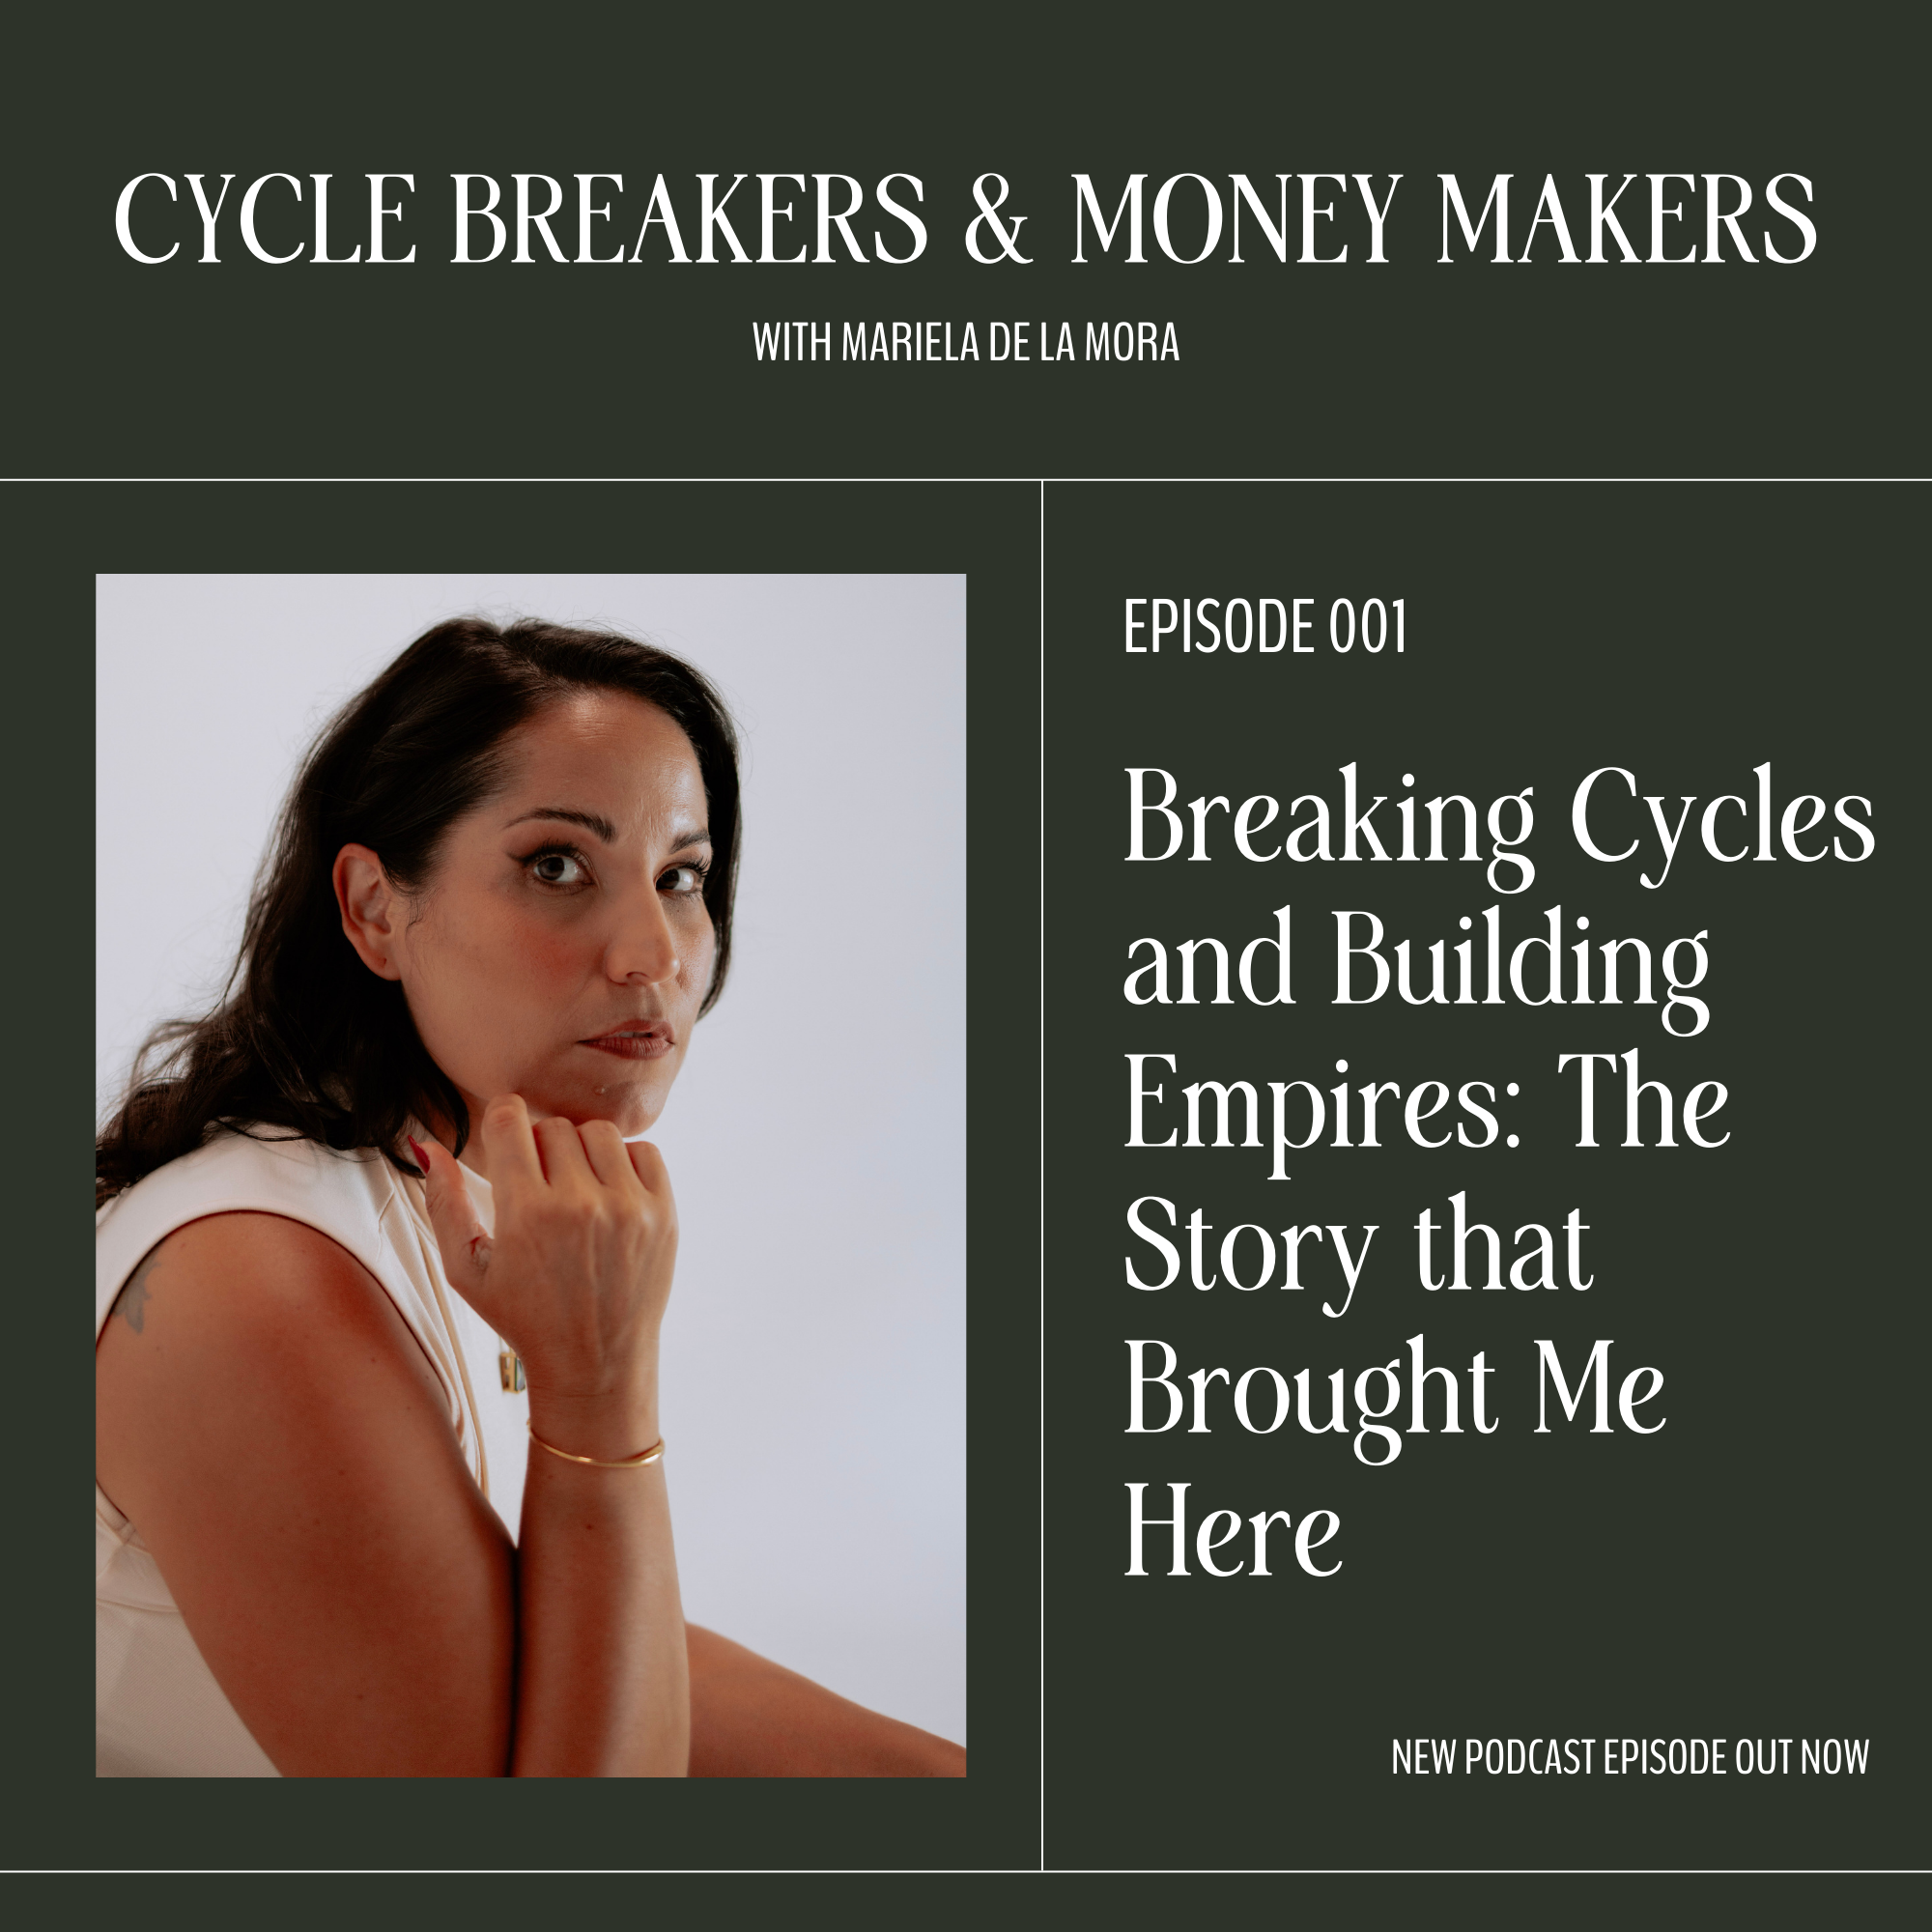 Breaking Cycles and Building EMpires: The Story that Brought Me Here